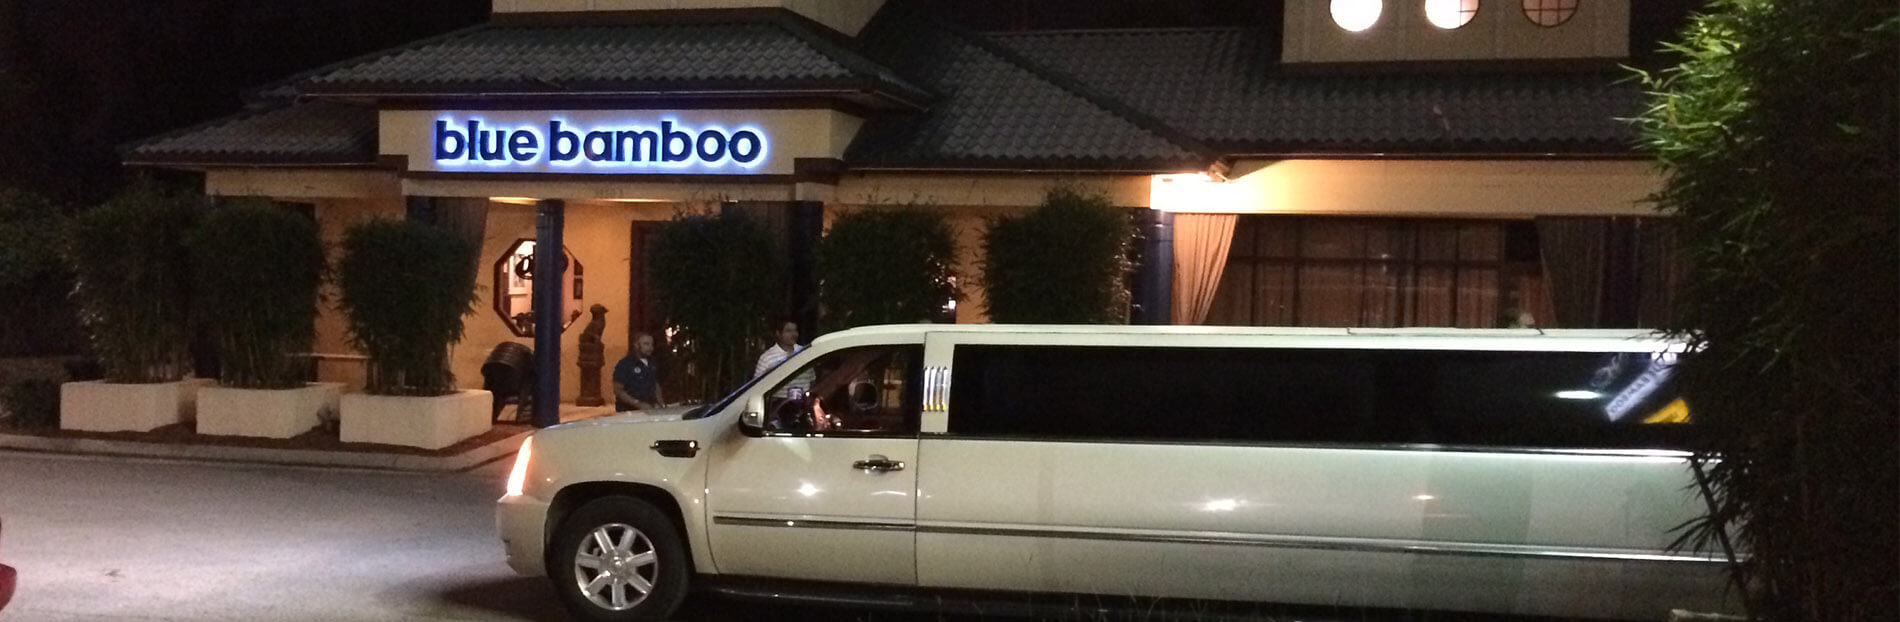 Limousine outside of Blue Bamboo